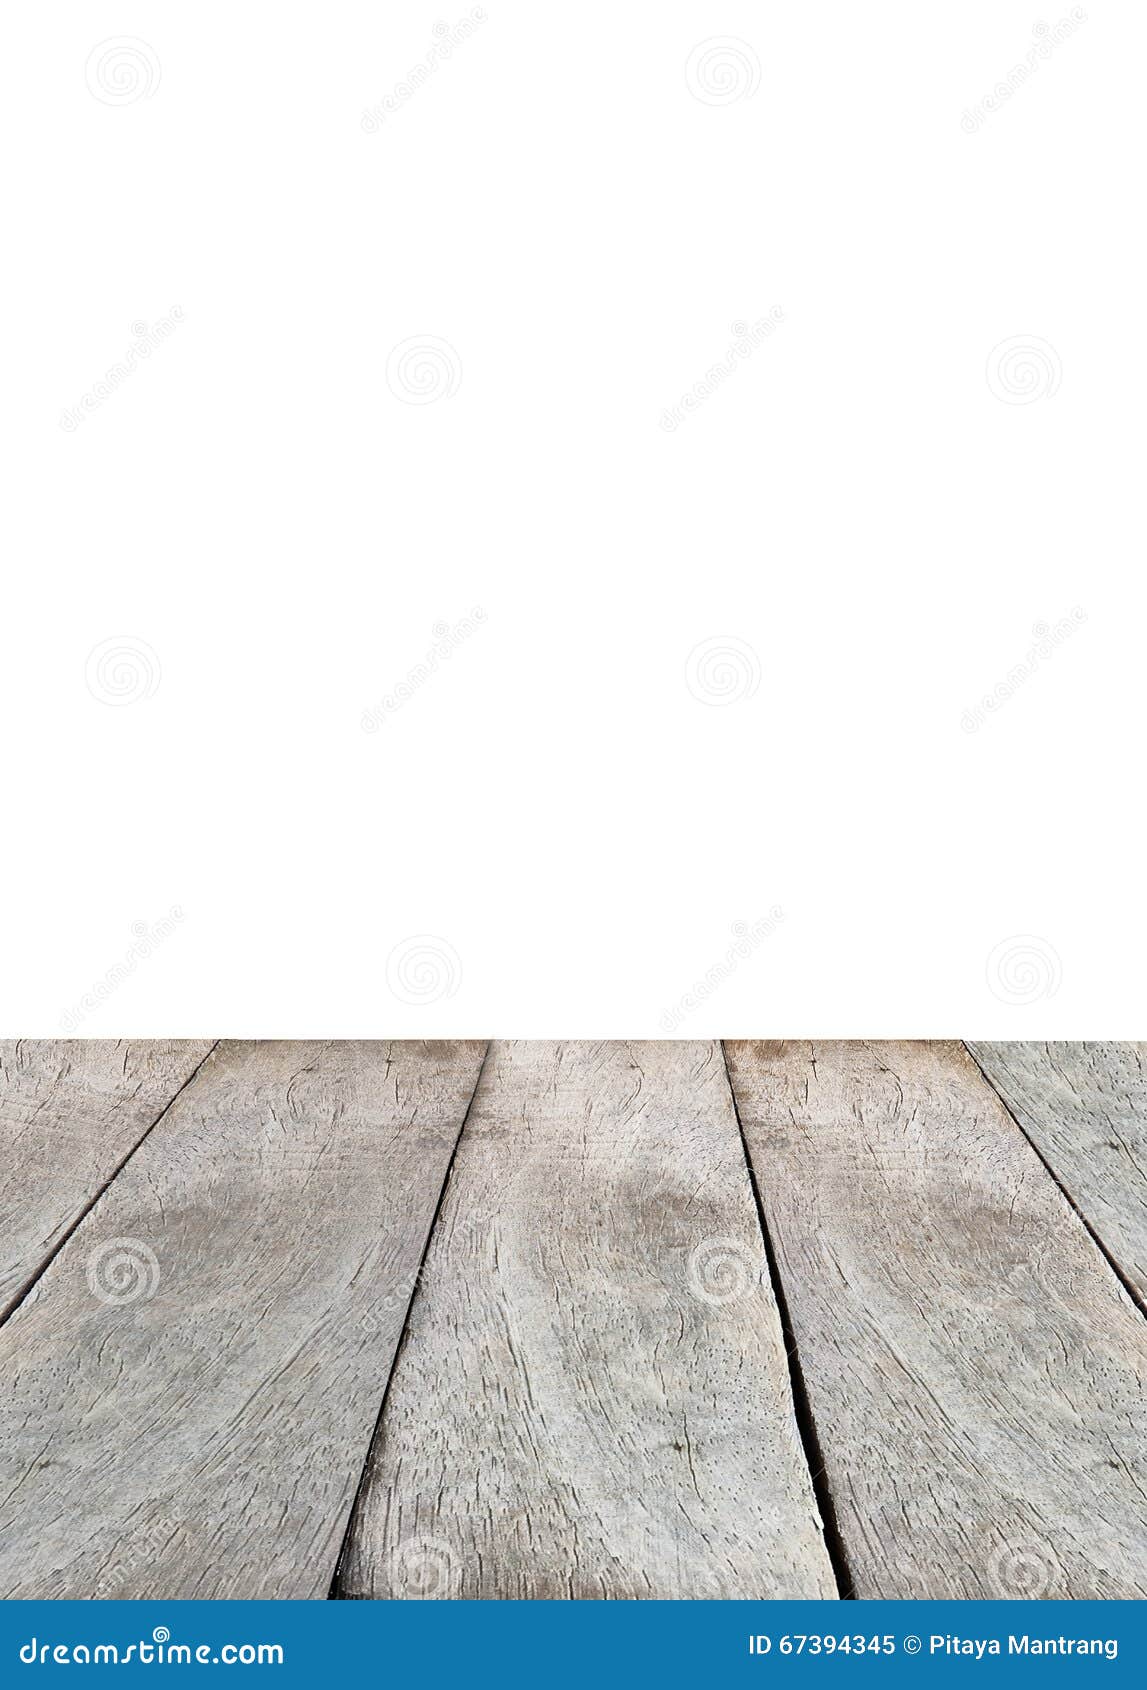 Wood Floor Texture Isolated On White Background Stock Image